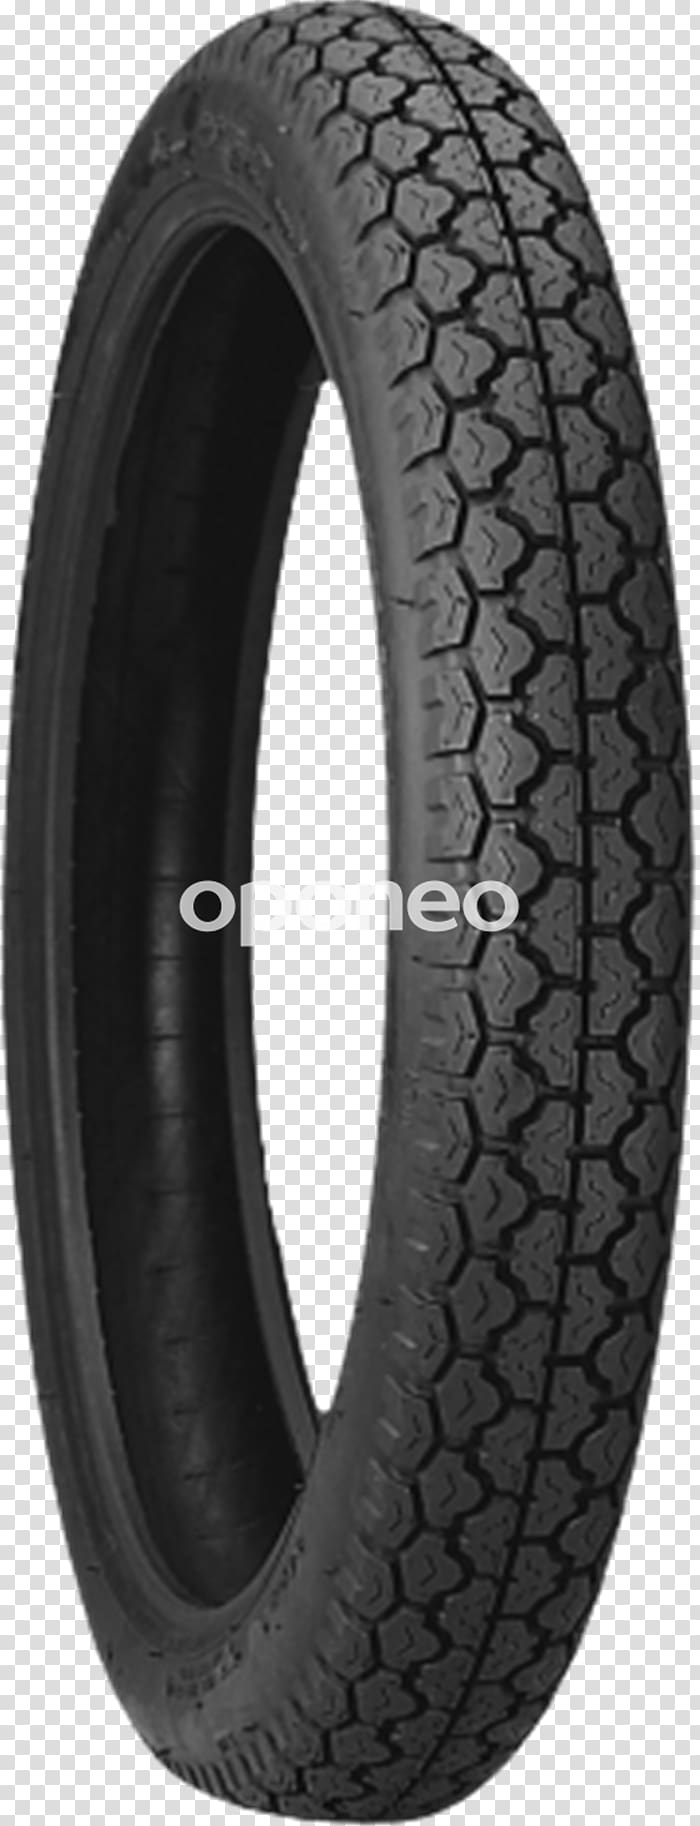 Tread Nankang Rubber Tire Motorcycle Toyo Tire & Rubber Company, motorcycle transparent background PNG clipart